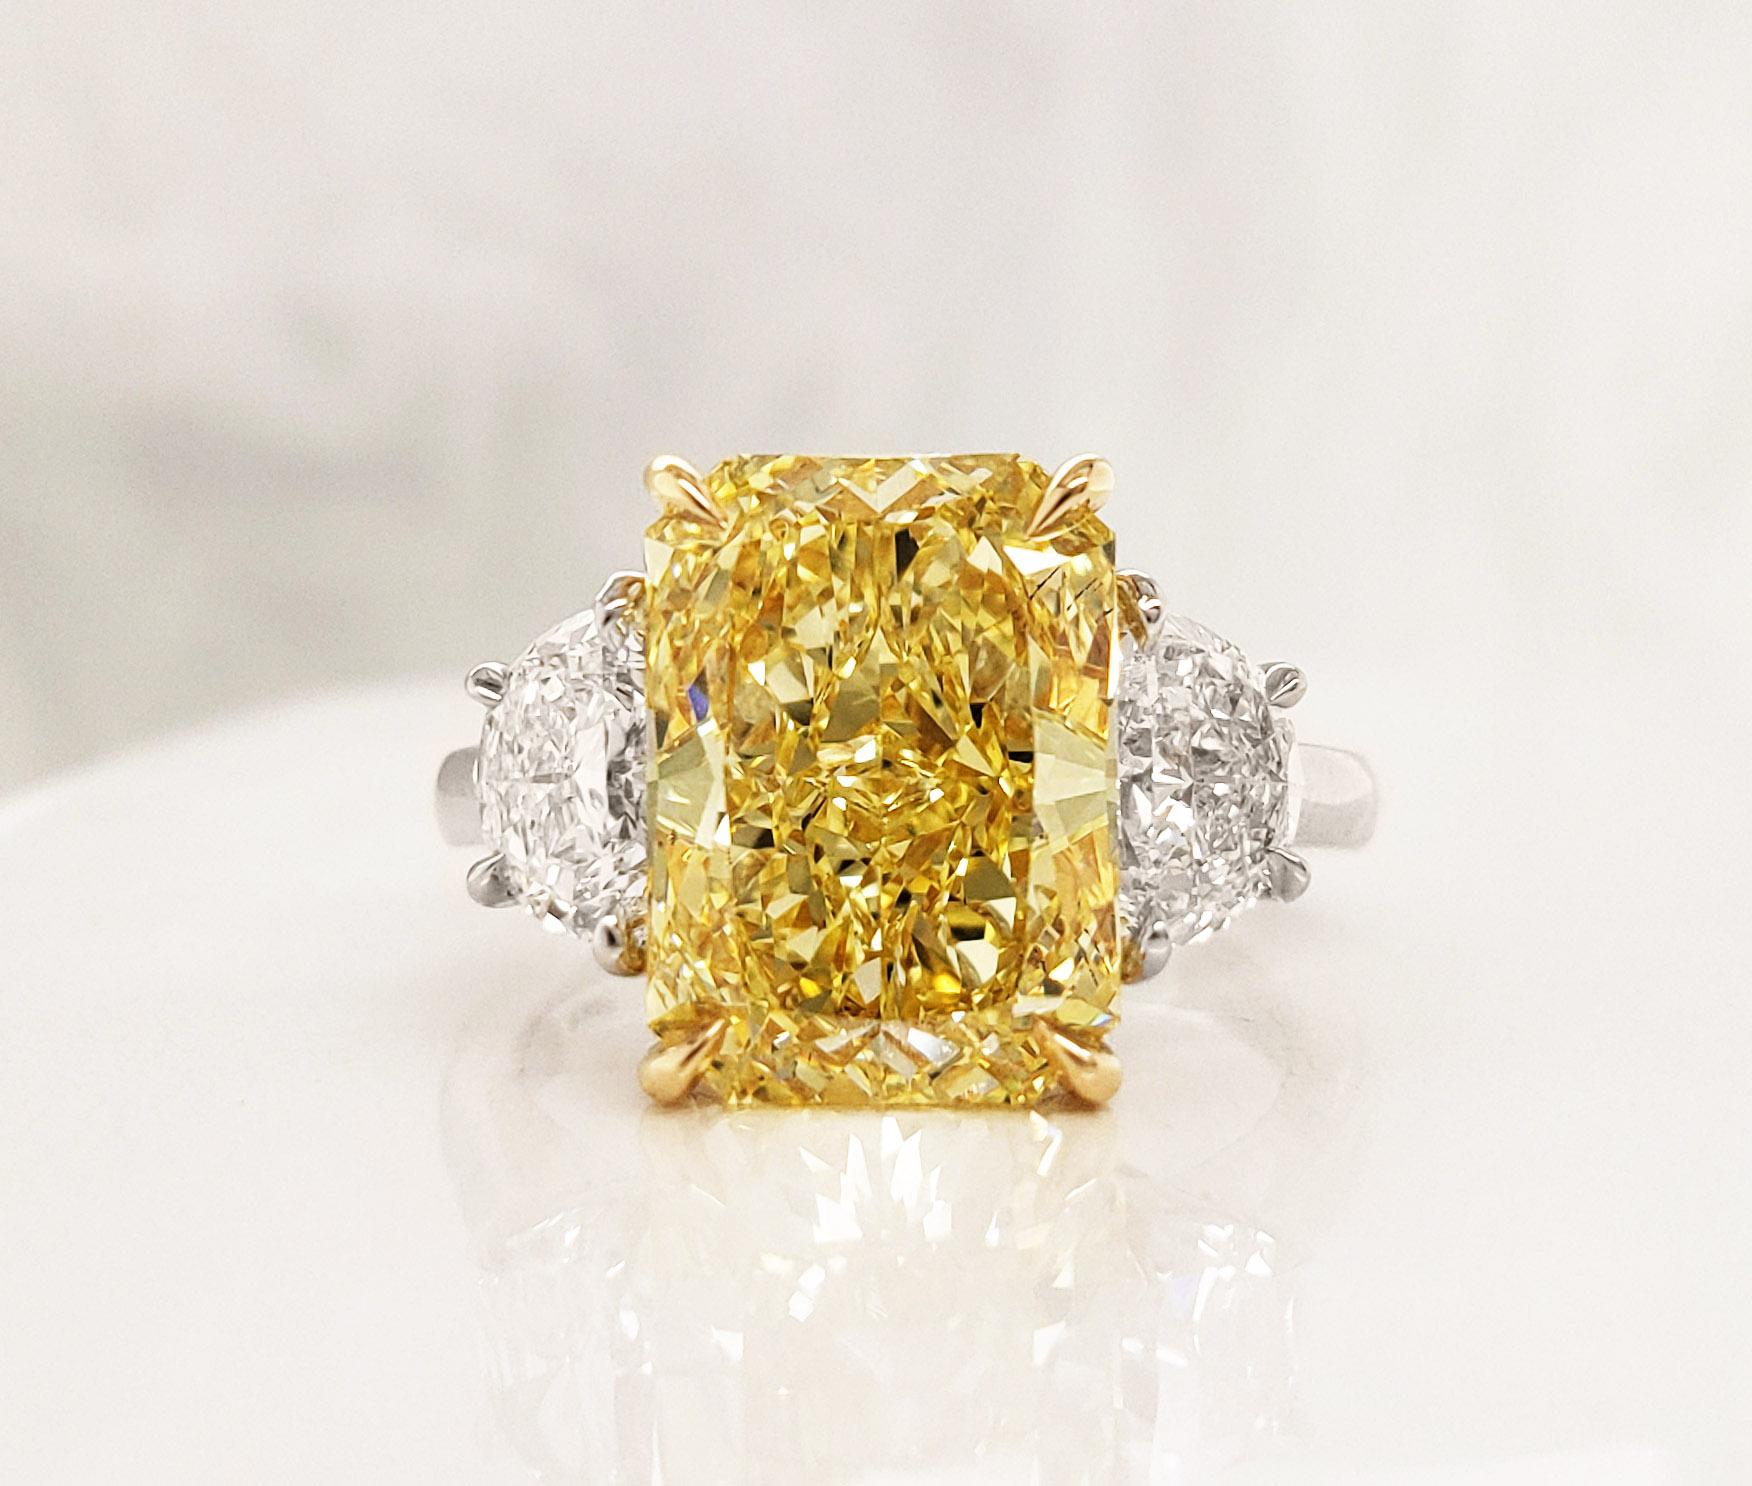 From SCARSELLI, this astonishing statement ring features a 5.01 carats Fancy Intense Yellow radiant cut diamond of VS2 clarity flanked with half-moon cut white diamonds 1.10 carats (0.55 each). Platinum and 18k yellow gold ring perfect for any